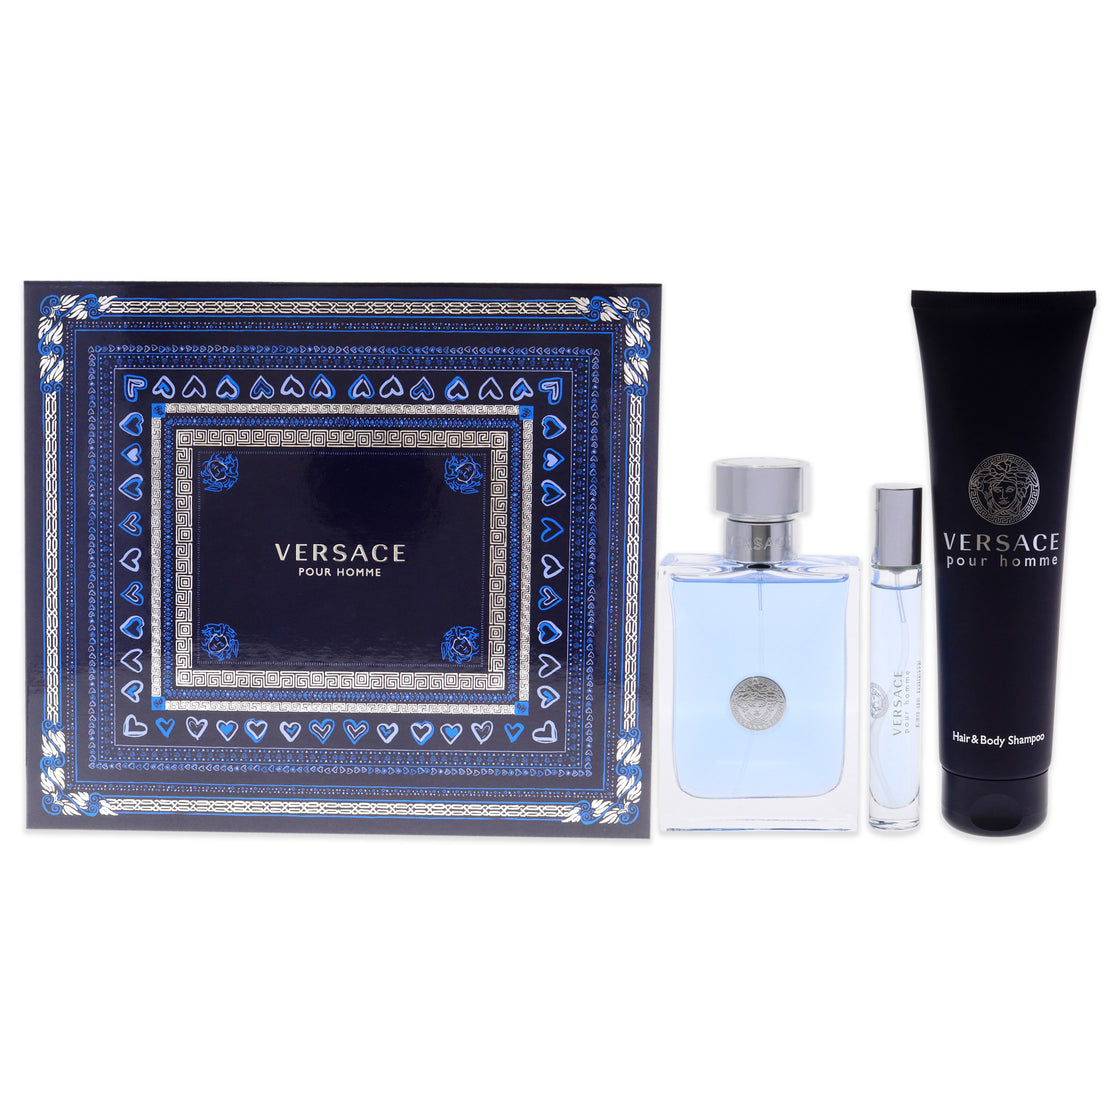 Versace Pour Homme by Versace for Men - 3 Pc Gift Set 3.4oz EDT Spray, 10ml EDT spray, 5.0oz Hair and Body Shampoo